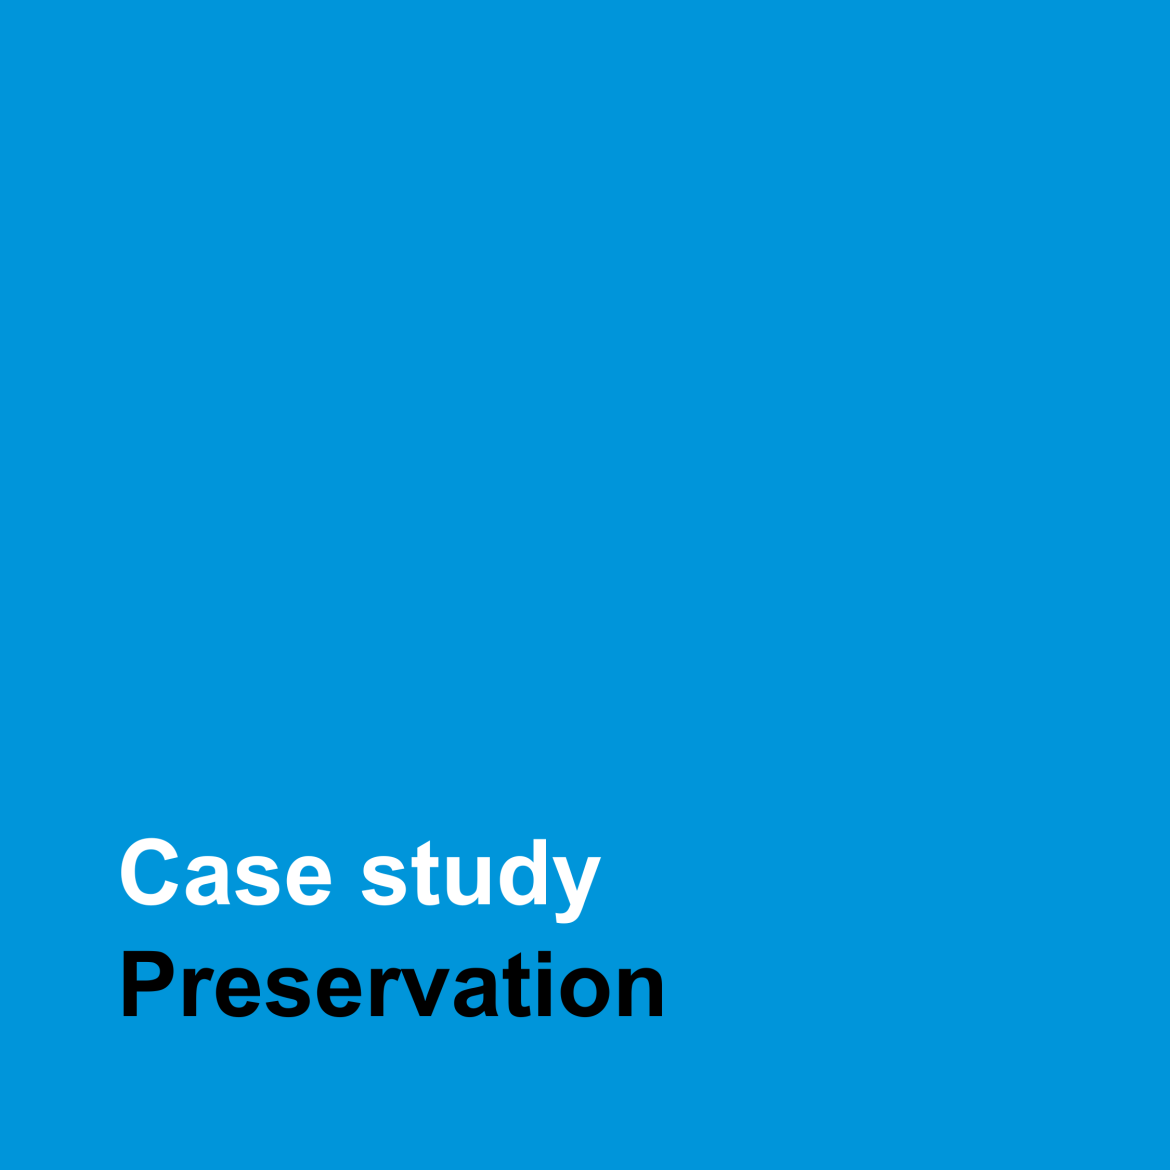 Case study about preservation